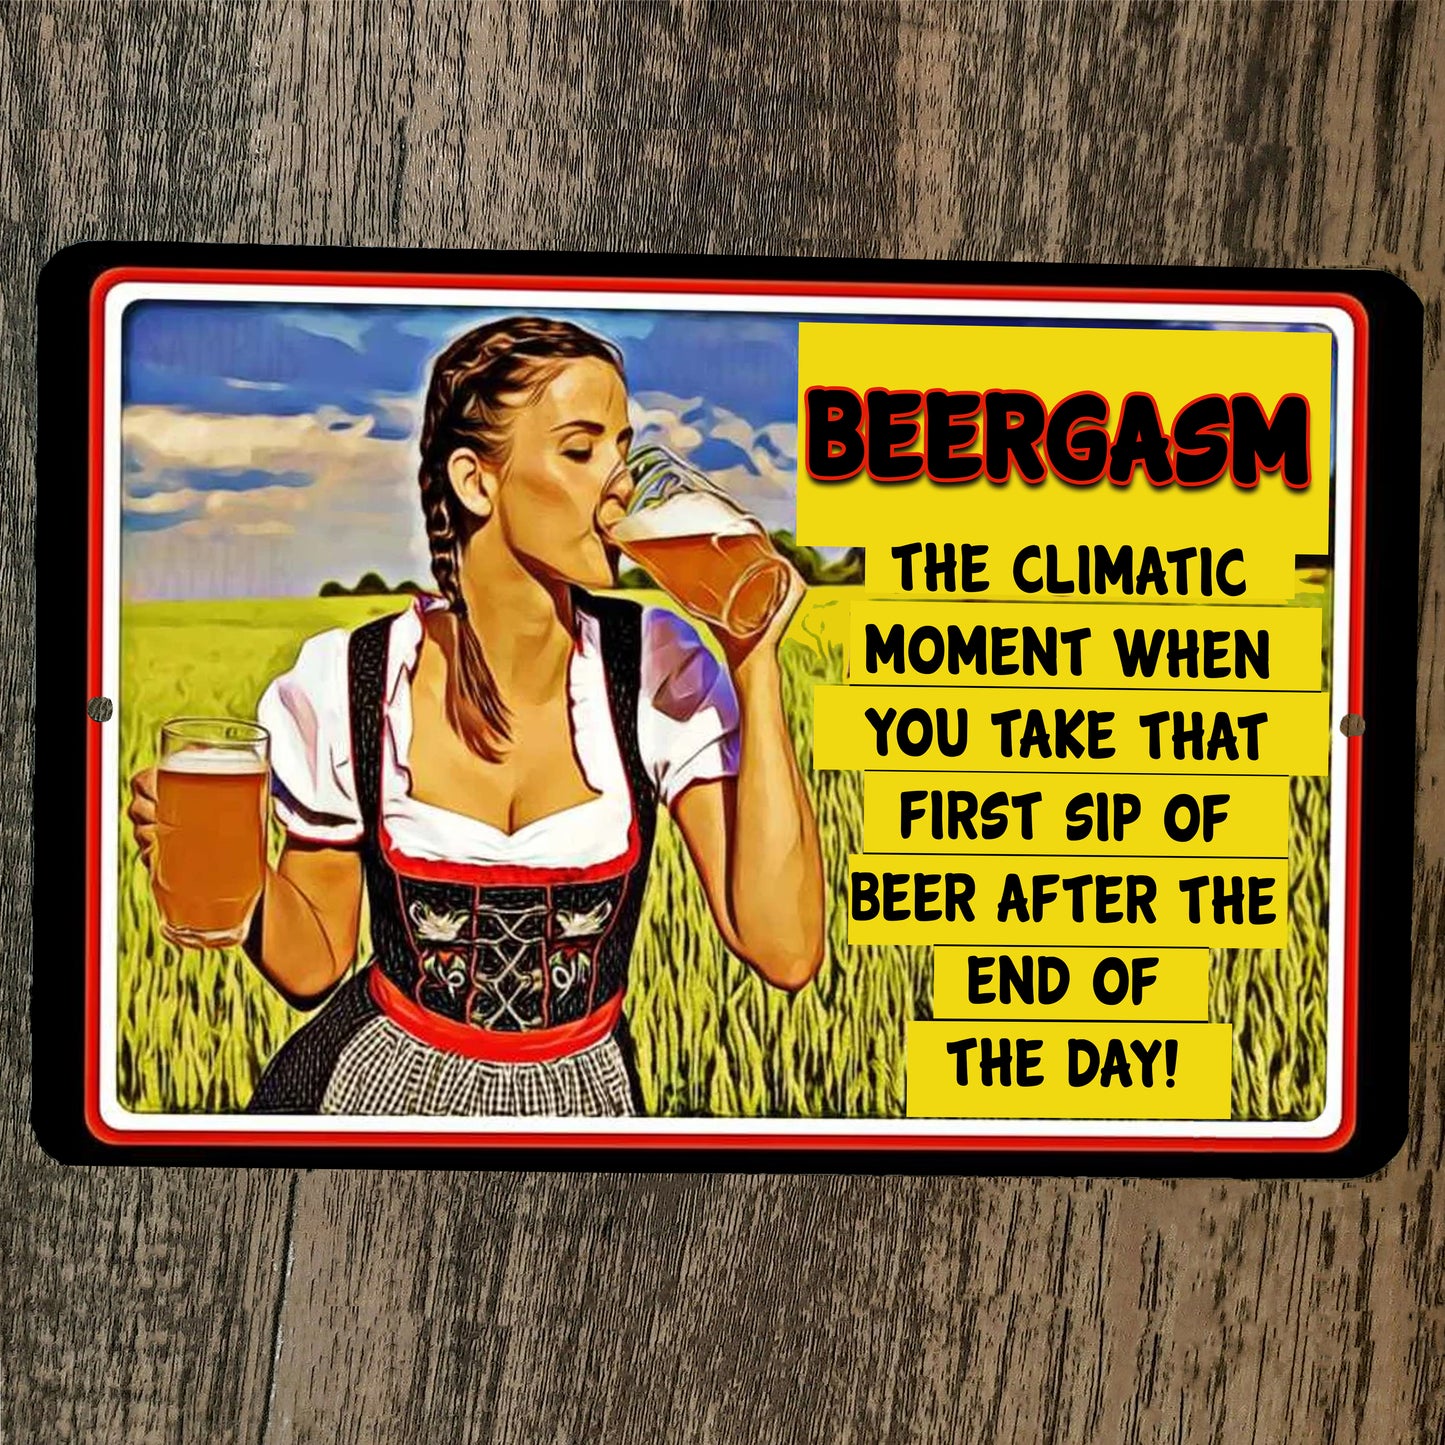 Bundle of Beers 5 Humorous 8x12 Metal Wall Bar Signs and Mouse Pad #3